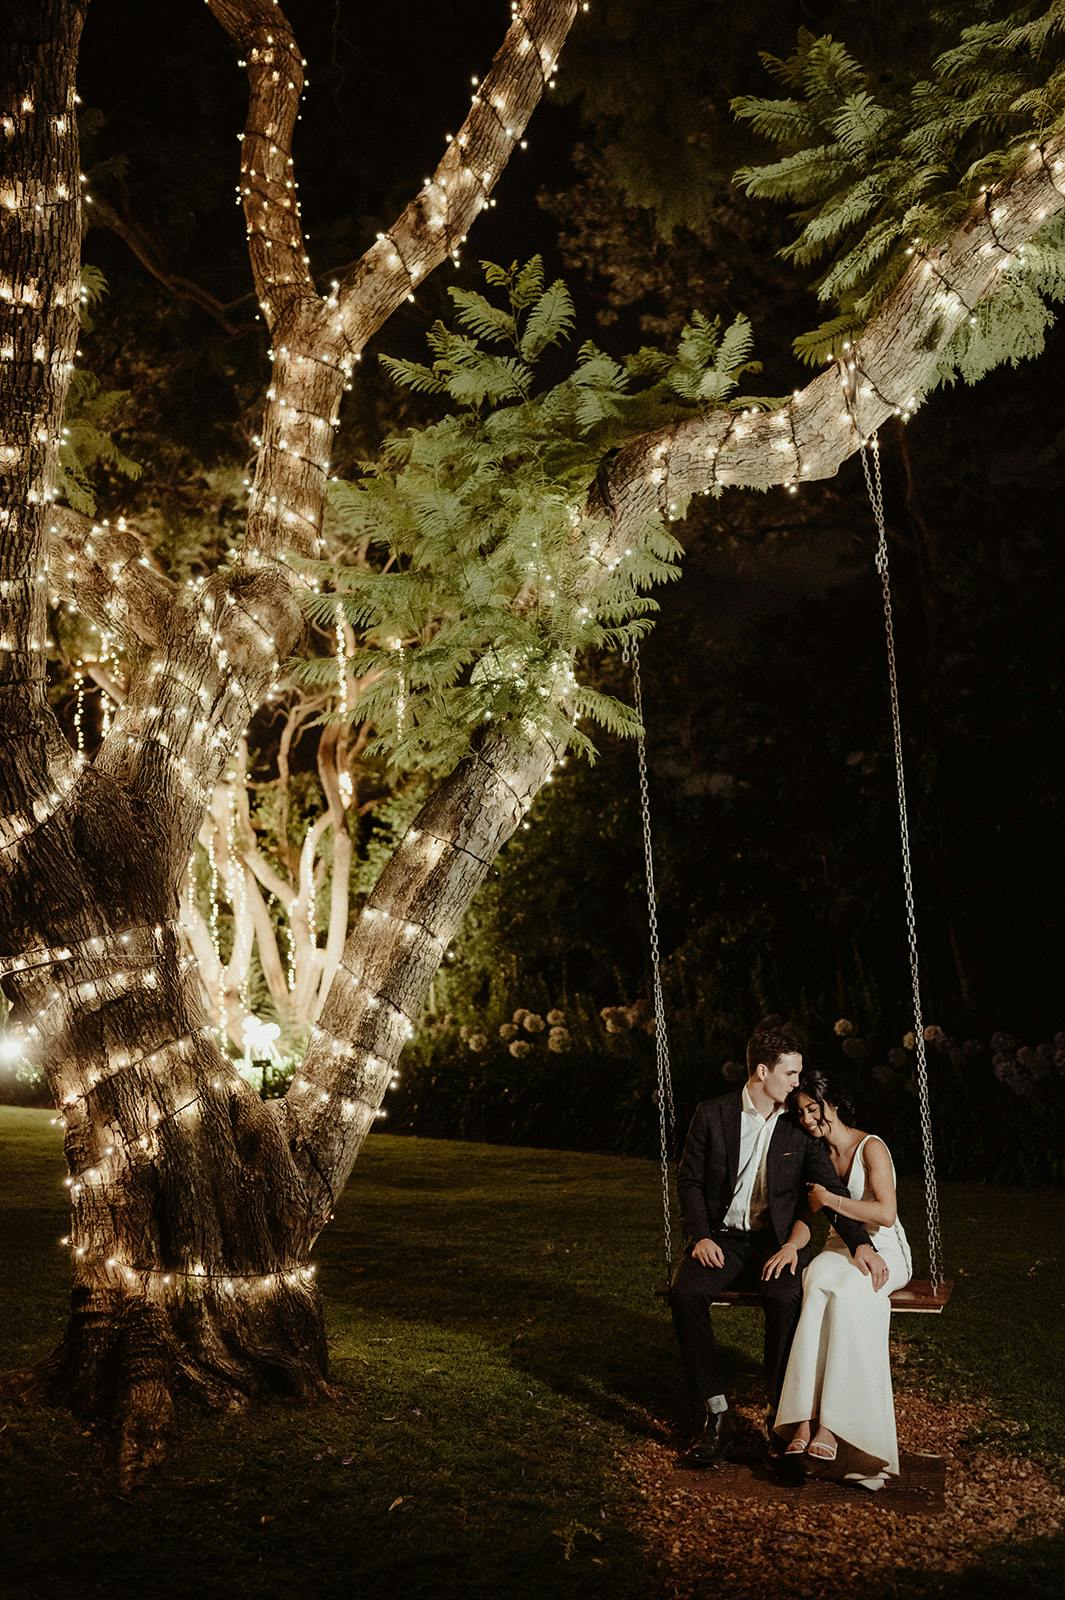 A couple dressed formally sit closely on a swing, suspended from a large tree wrapped in string lights, creating a romantic and serene night-time atmosphere. The woman lays her head on the man's shoulder as they sit under the illuminated branches.